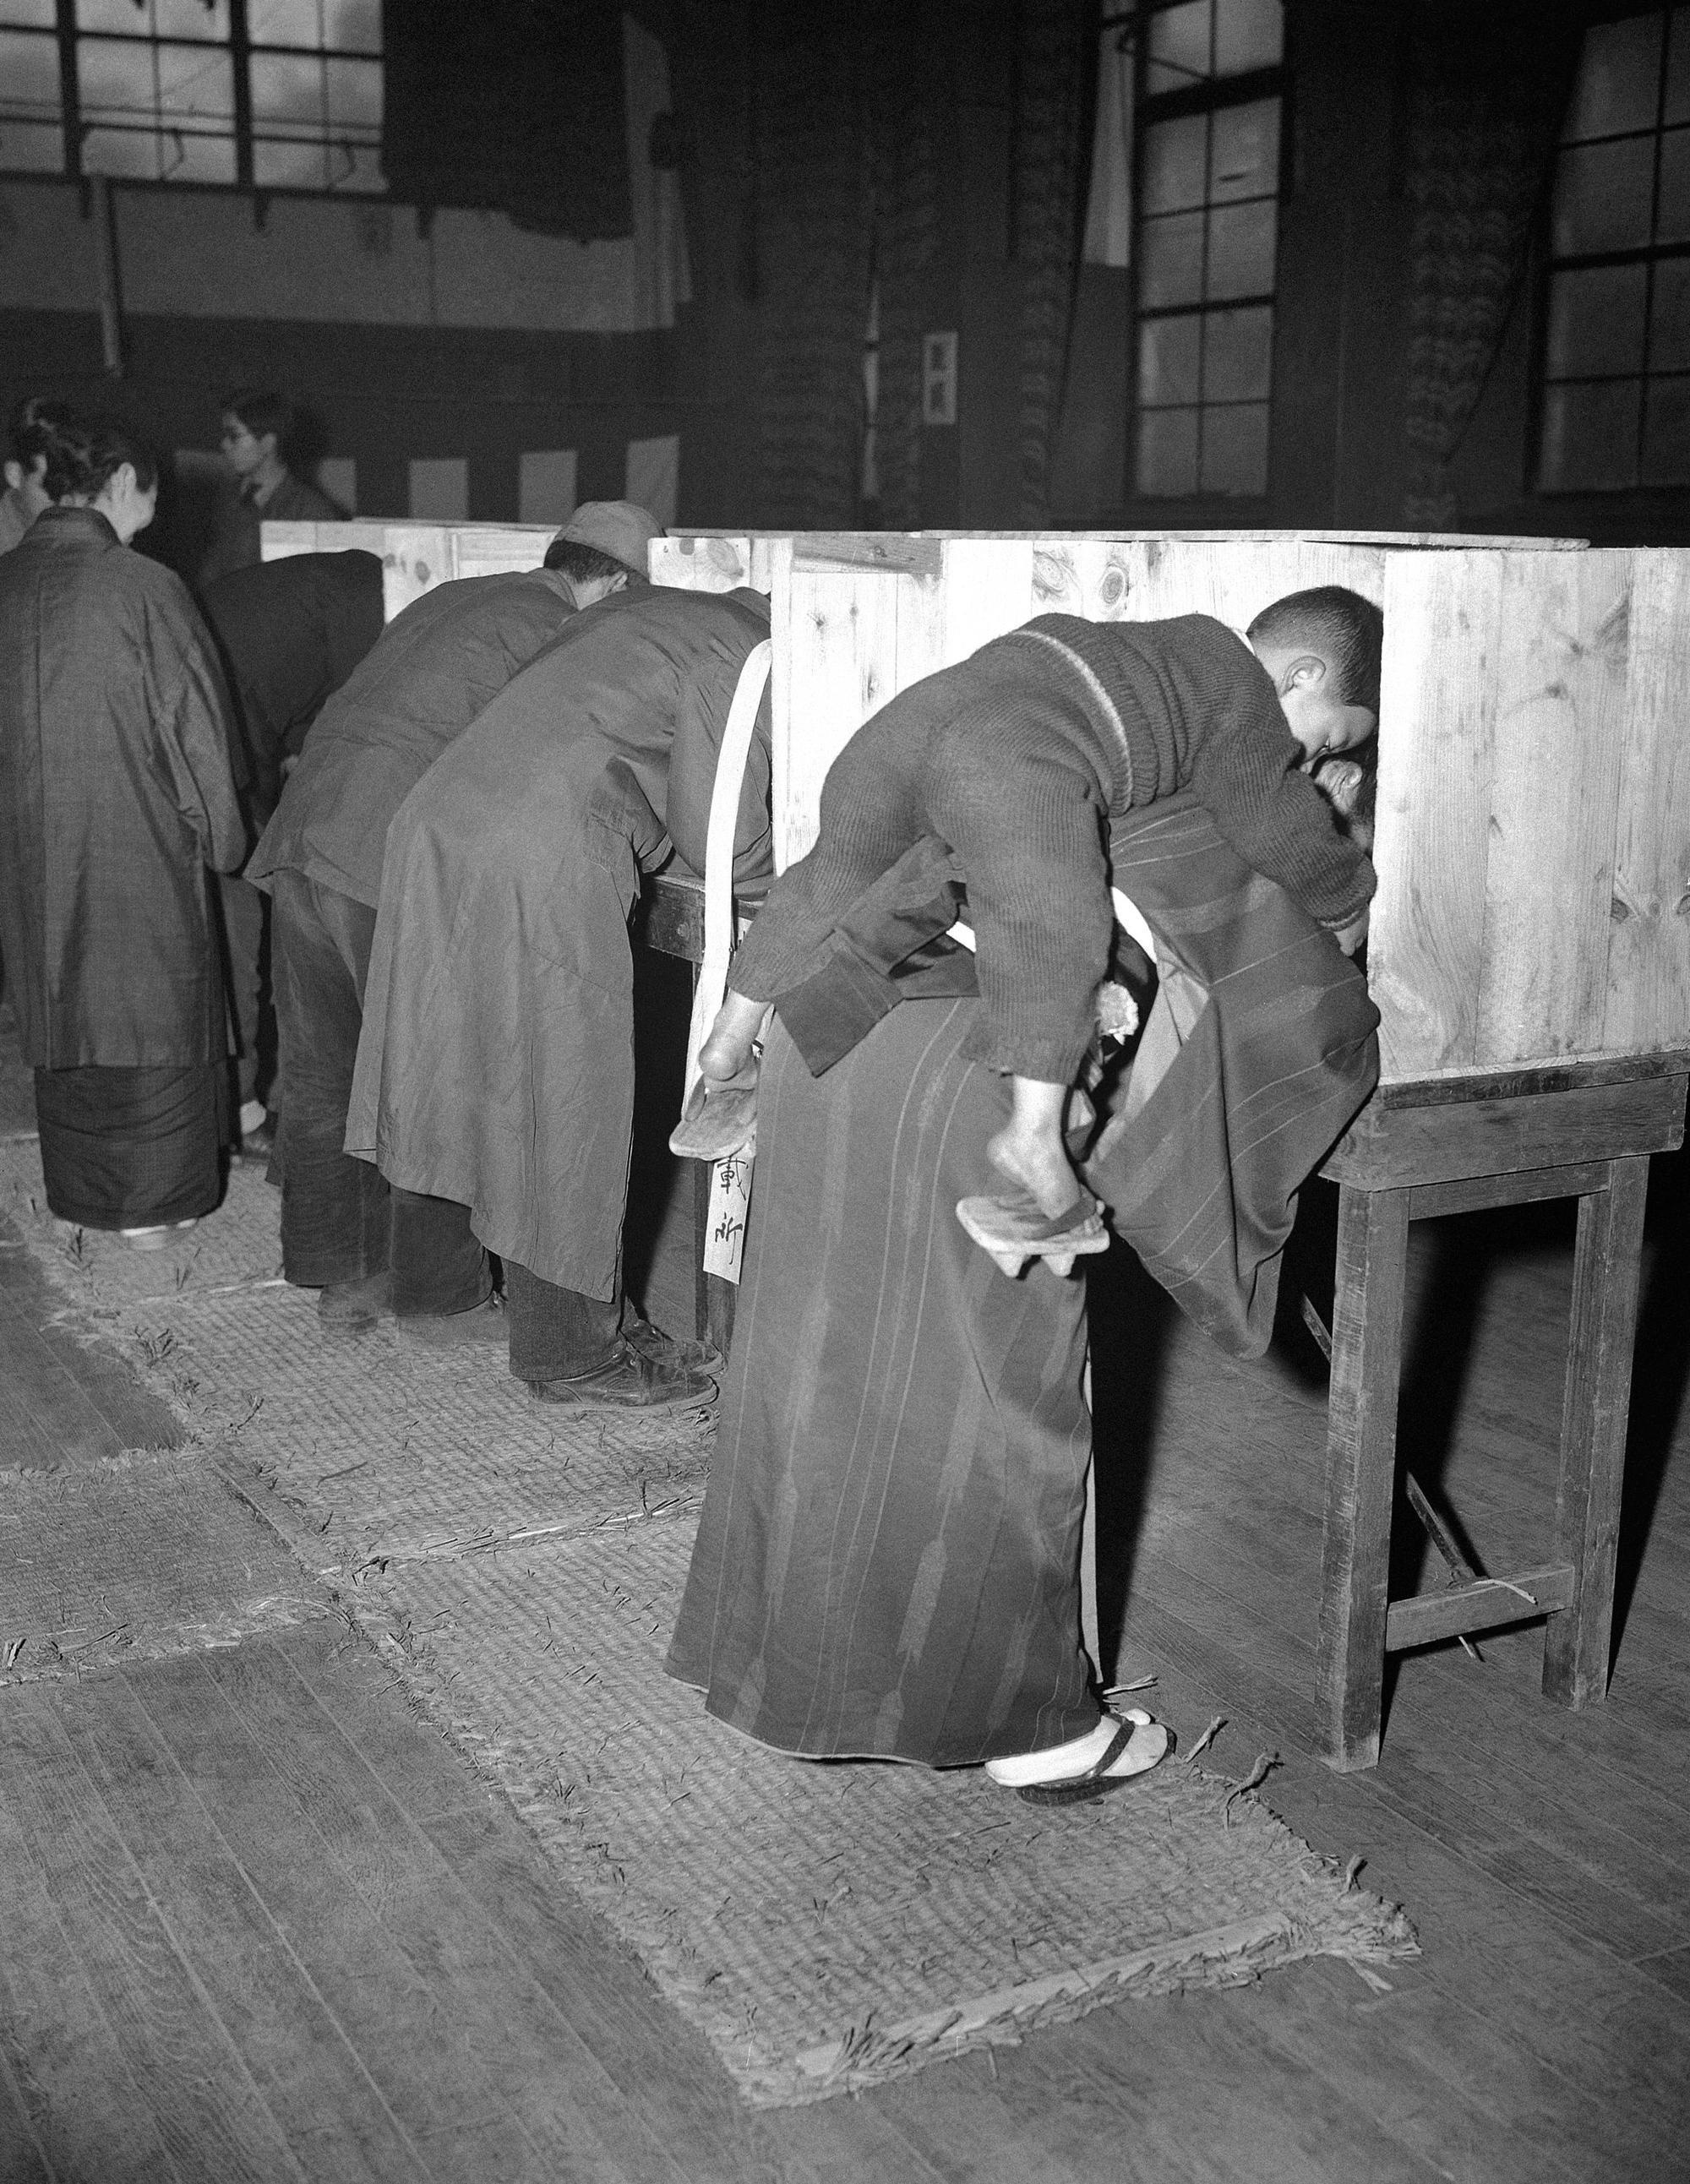 A Japanese woman carries her son on her back as she marks her ballot. This was in the first free election in 1946 Tokyo.